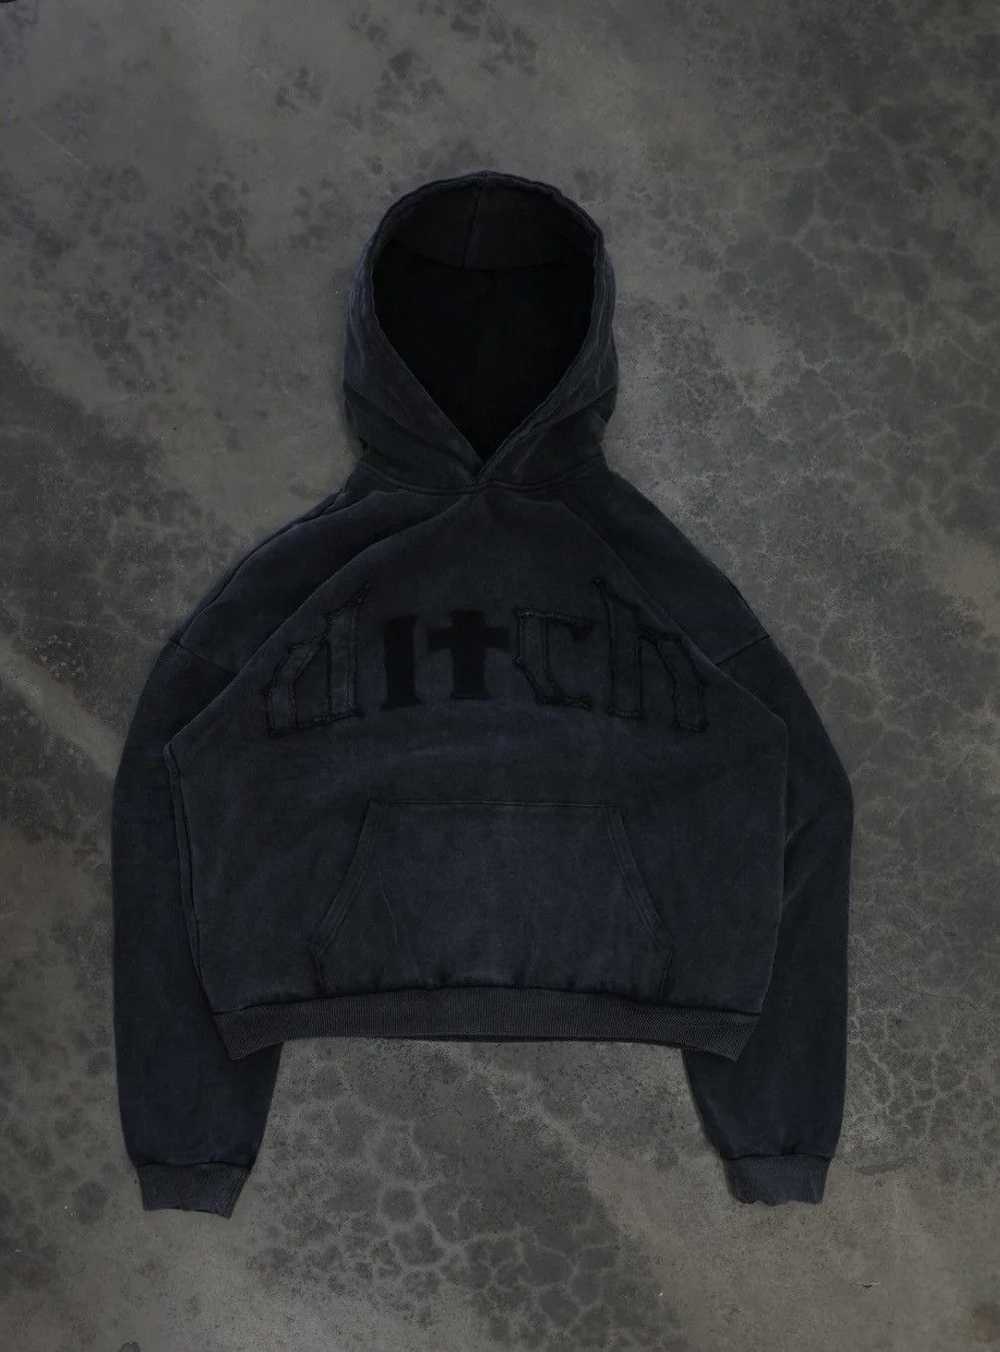 Other × Streetwear Ditch La “Coal” Missing Patch … - image 1